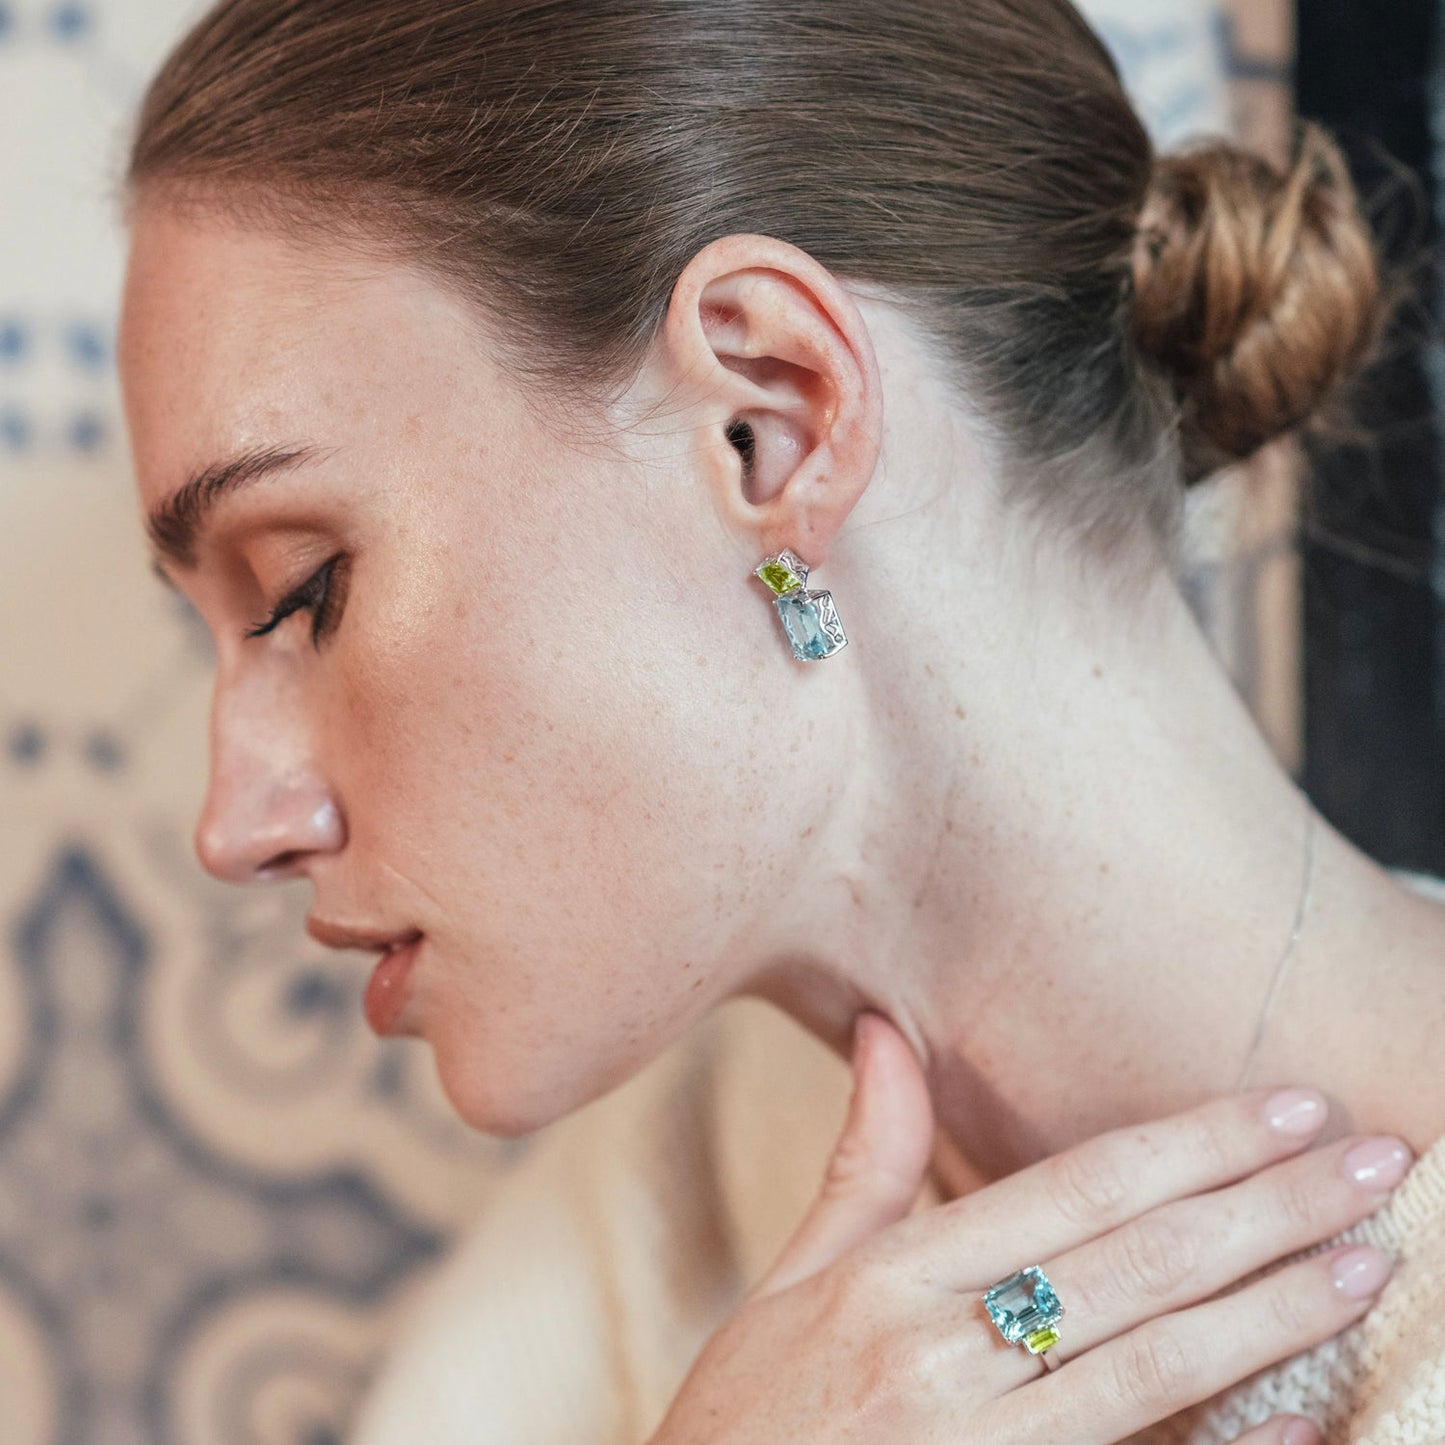 London-made luxury custom gold jewellery – Model demonstrating the wear of the 9ct Yellow Gold Octagon Ring in Peridot and Blue Topaz and the 9ct Yellow Gold Octagon Gold Drop Earrings in Peridot and Blue Topaz – Andalusian Collection, Augustine Jewellery, British Jewellers, Gemstone Jewellery, Luxury Jewellery London.